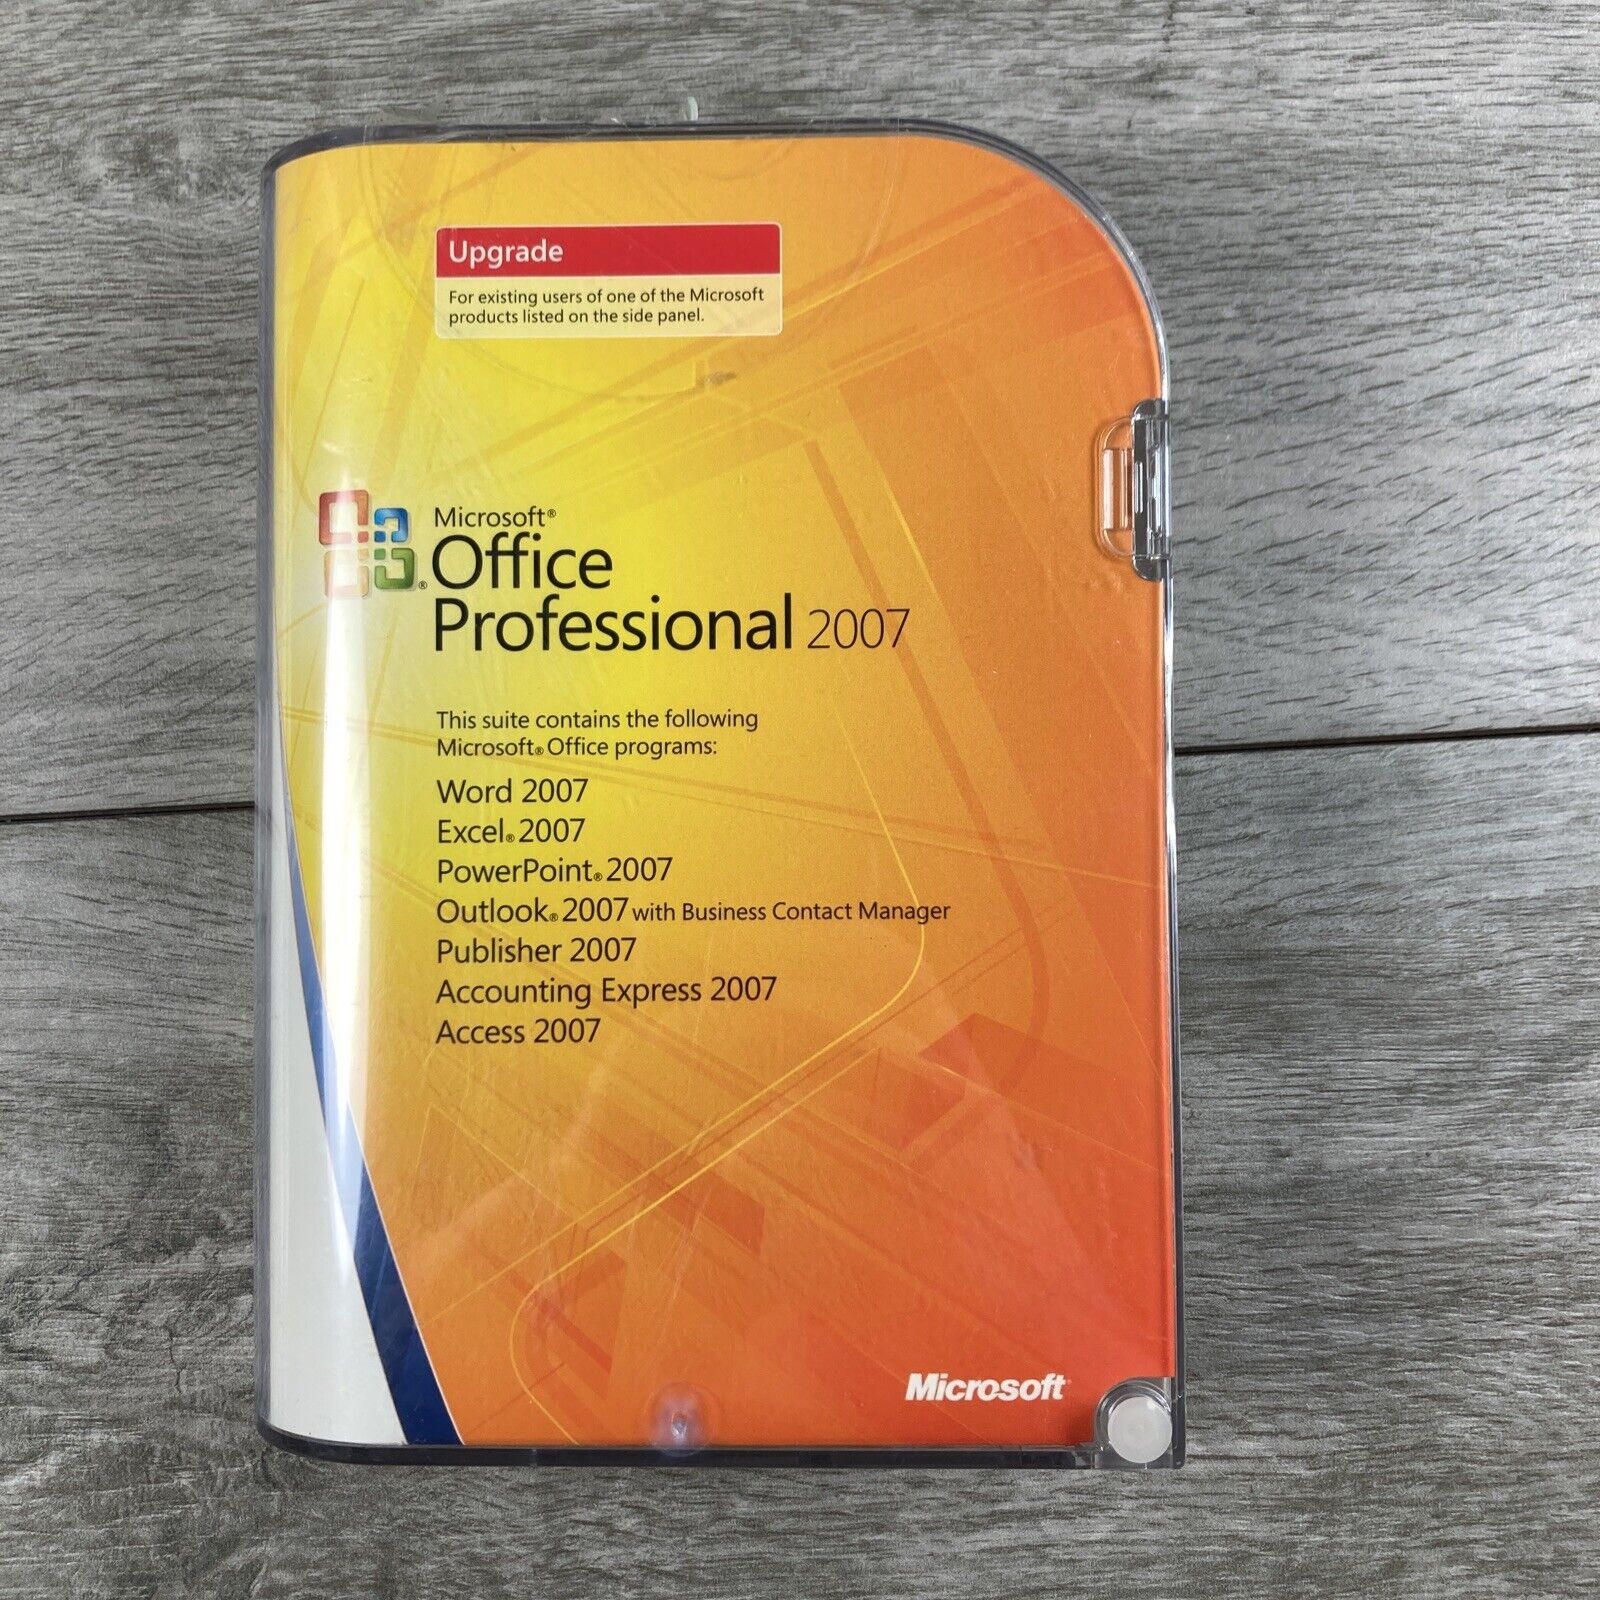 Microsoft Office Professional 2007 - Upgrade Genuine W/ Activation Code